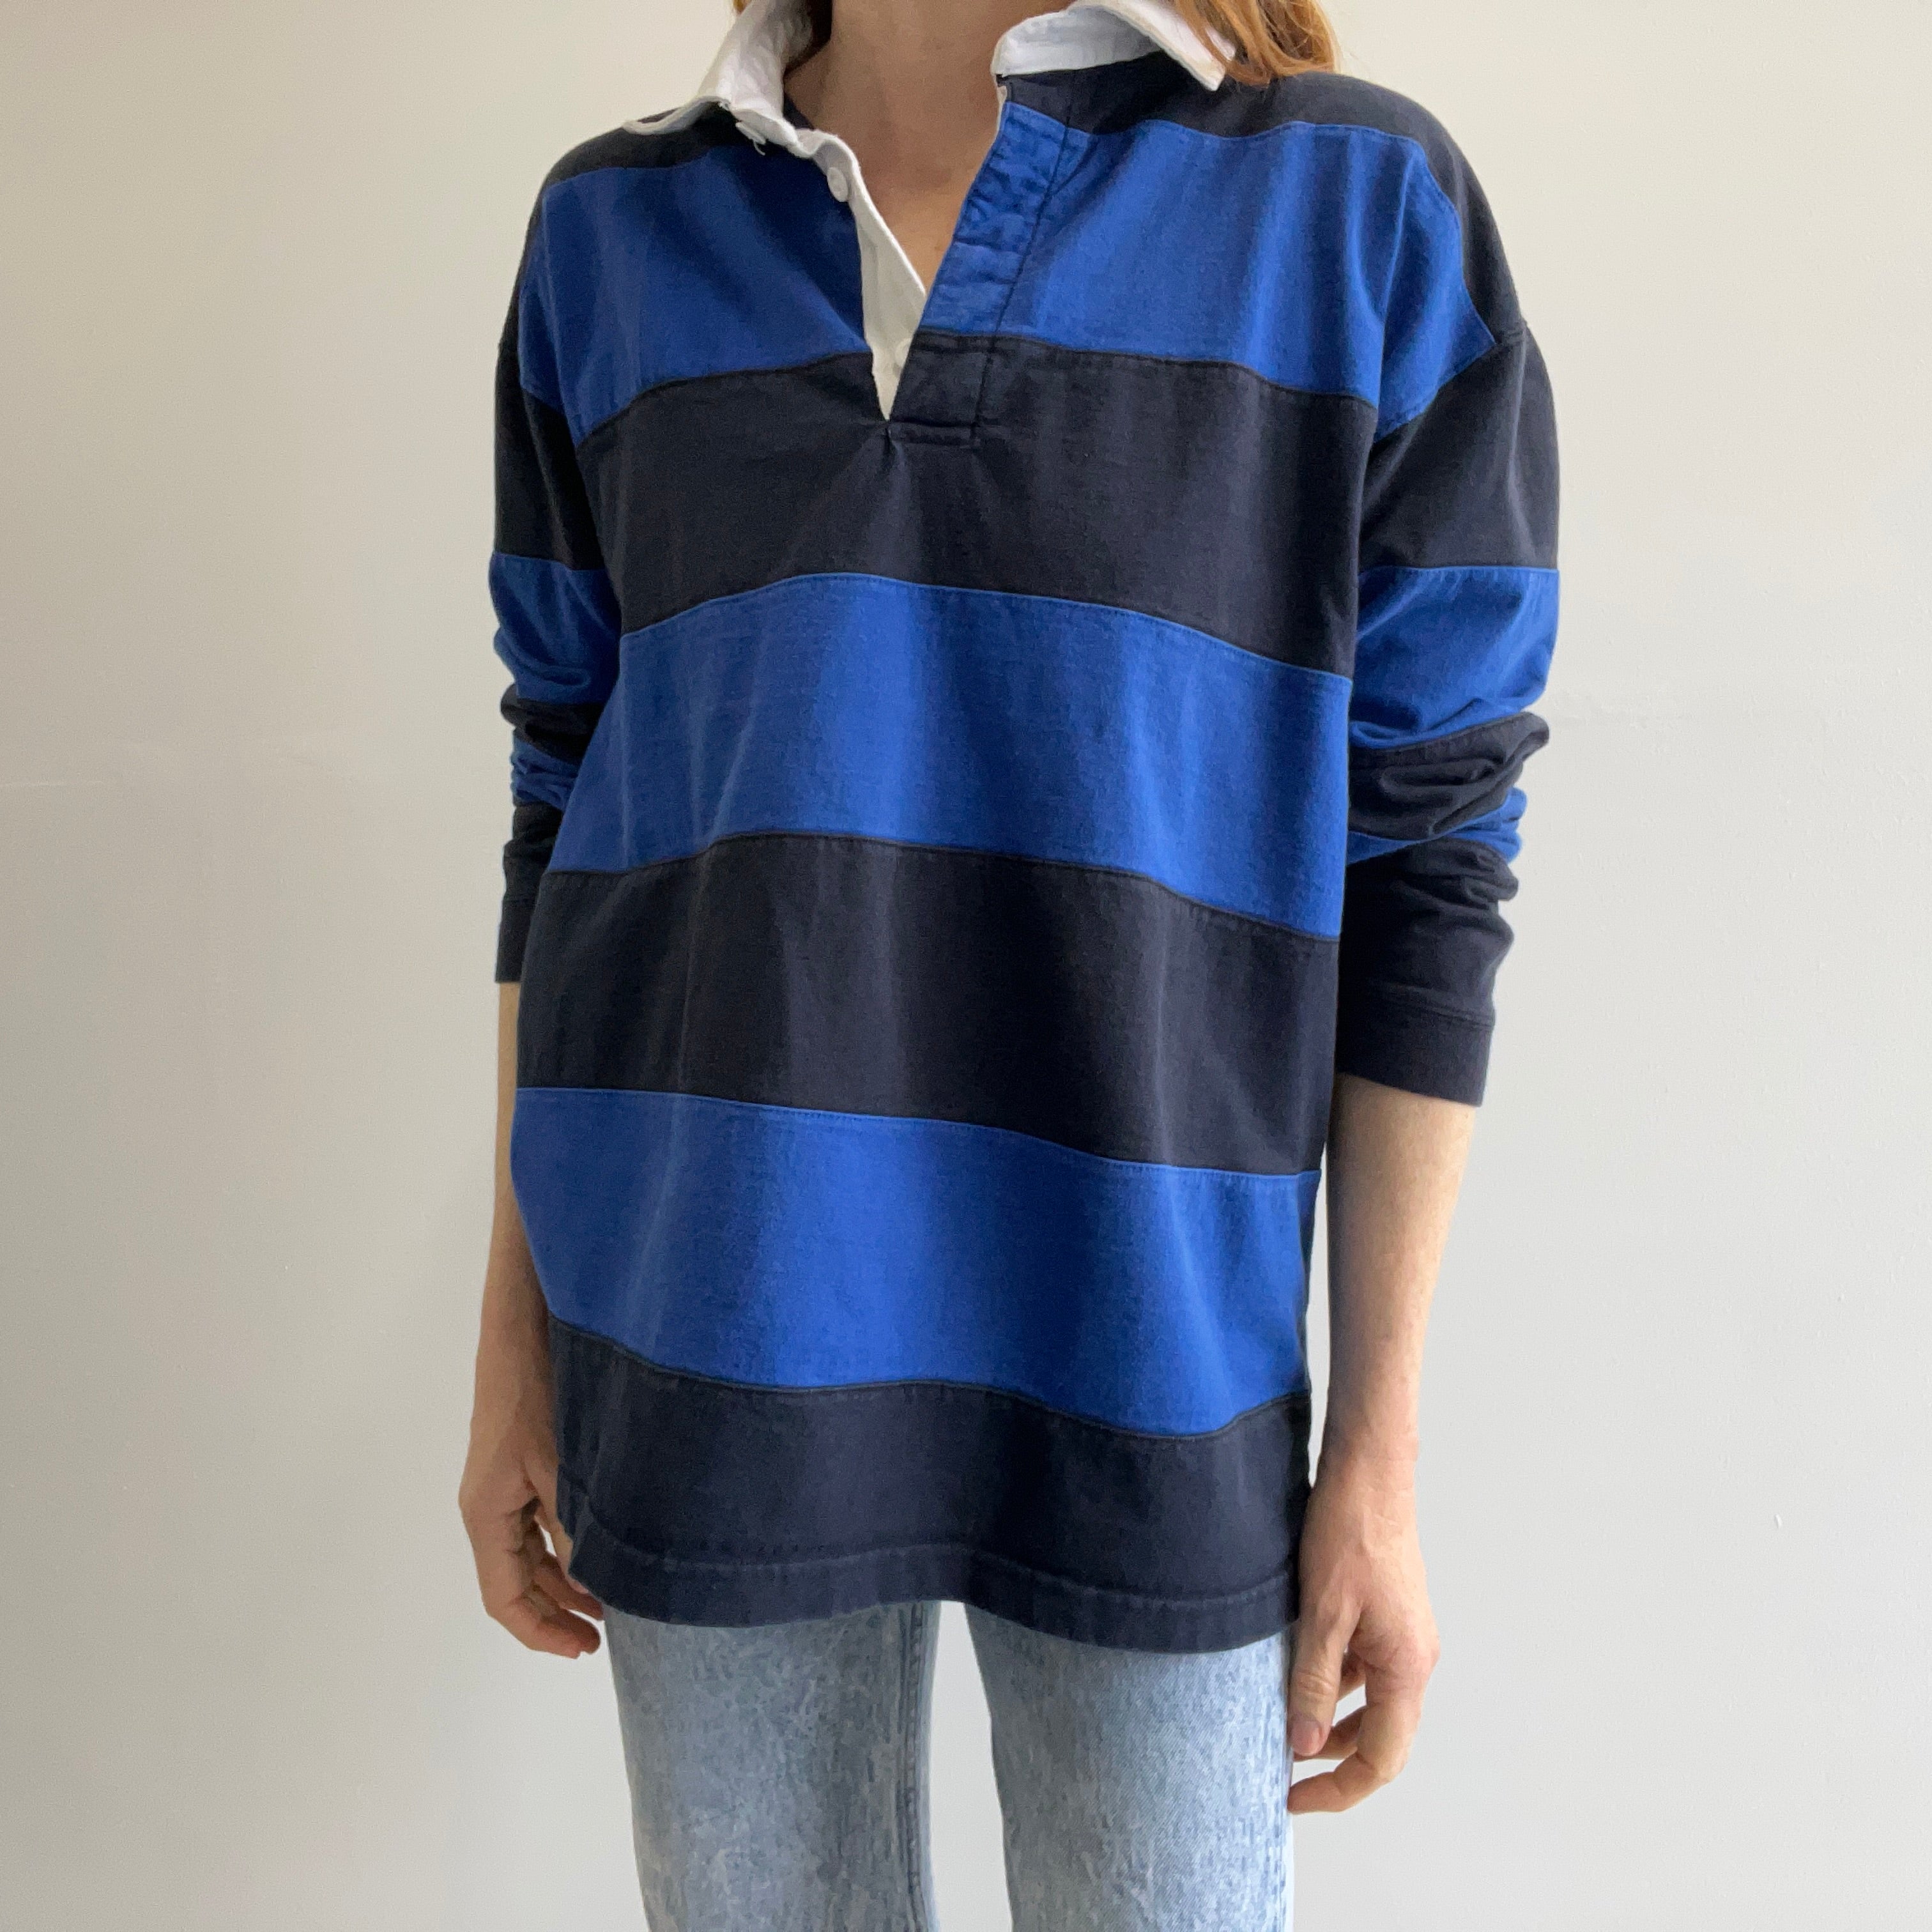 1990s Dark and Not So Dark Blue Striped Rugby Shirt